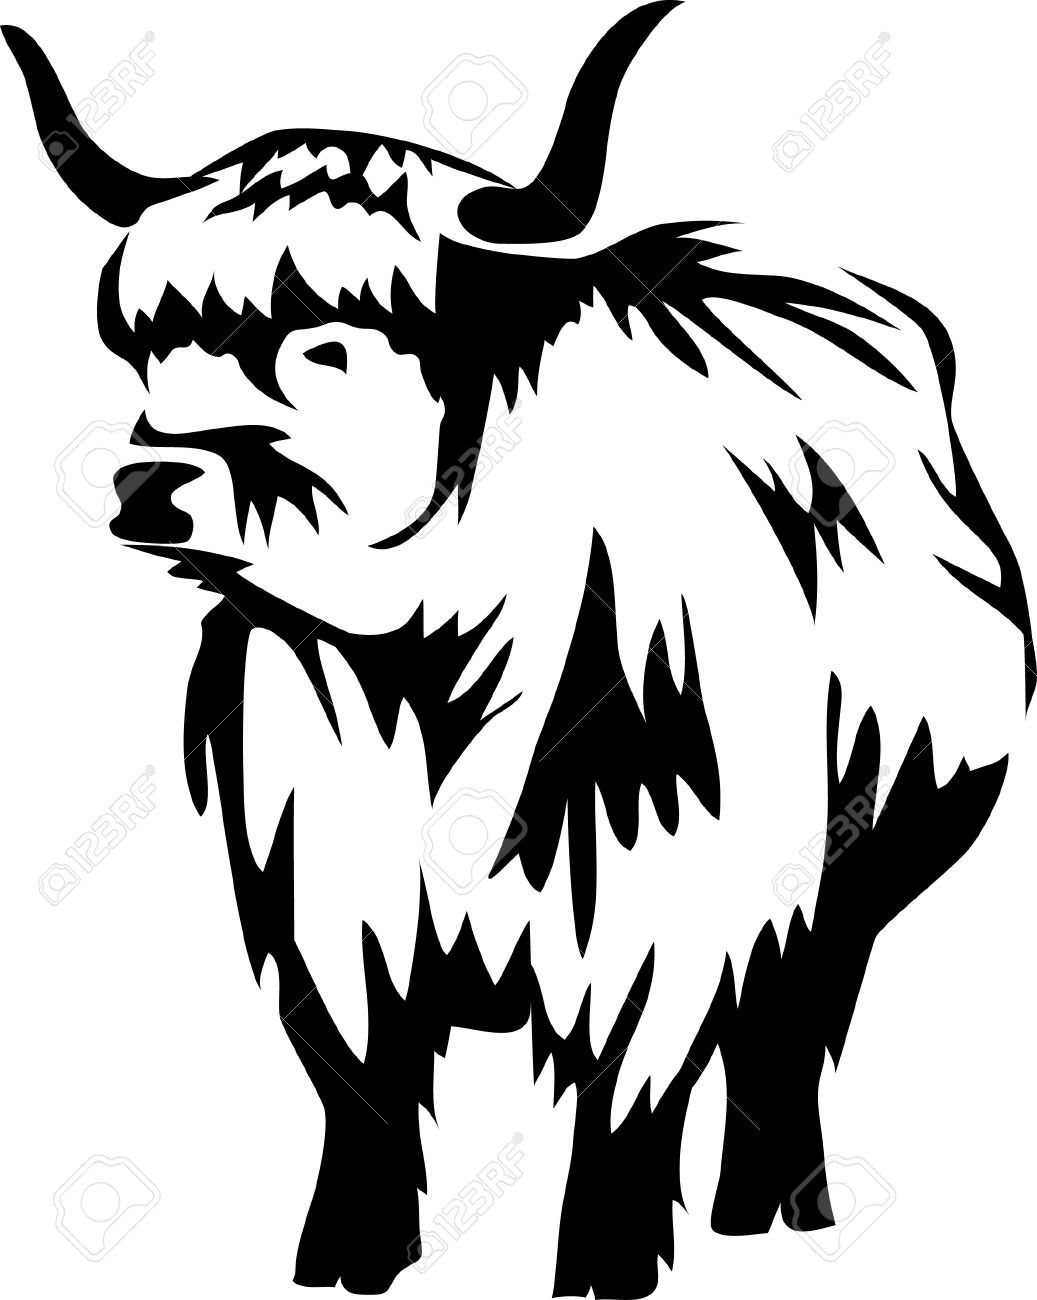 Highland cattle clipart.